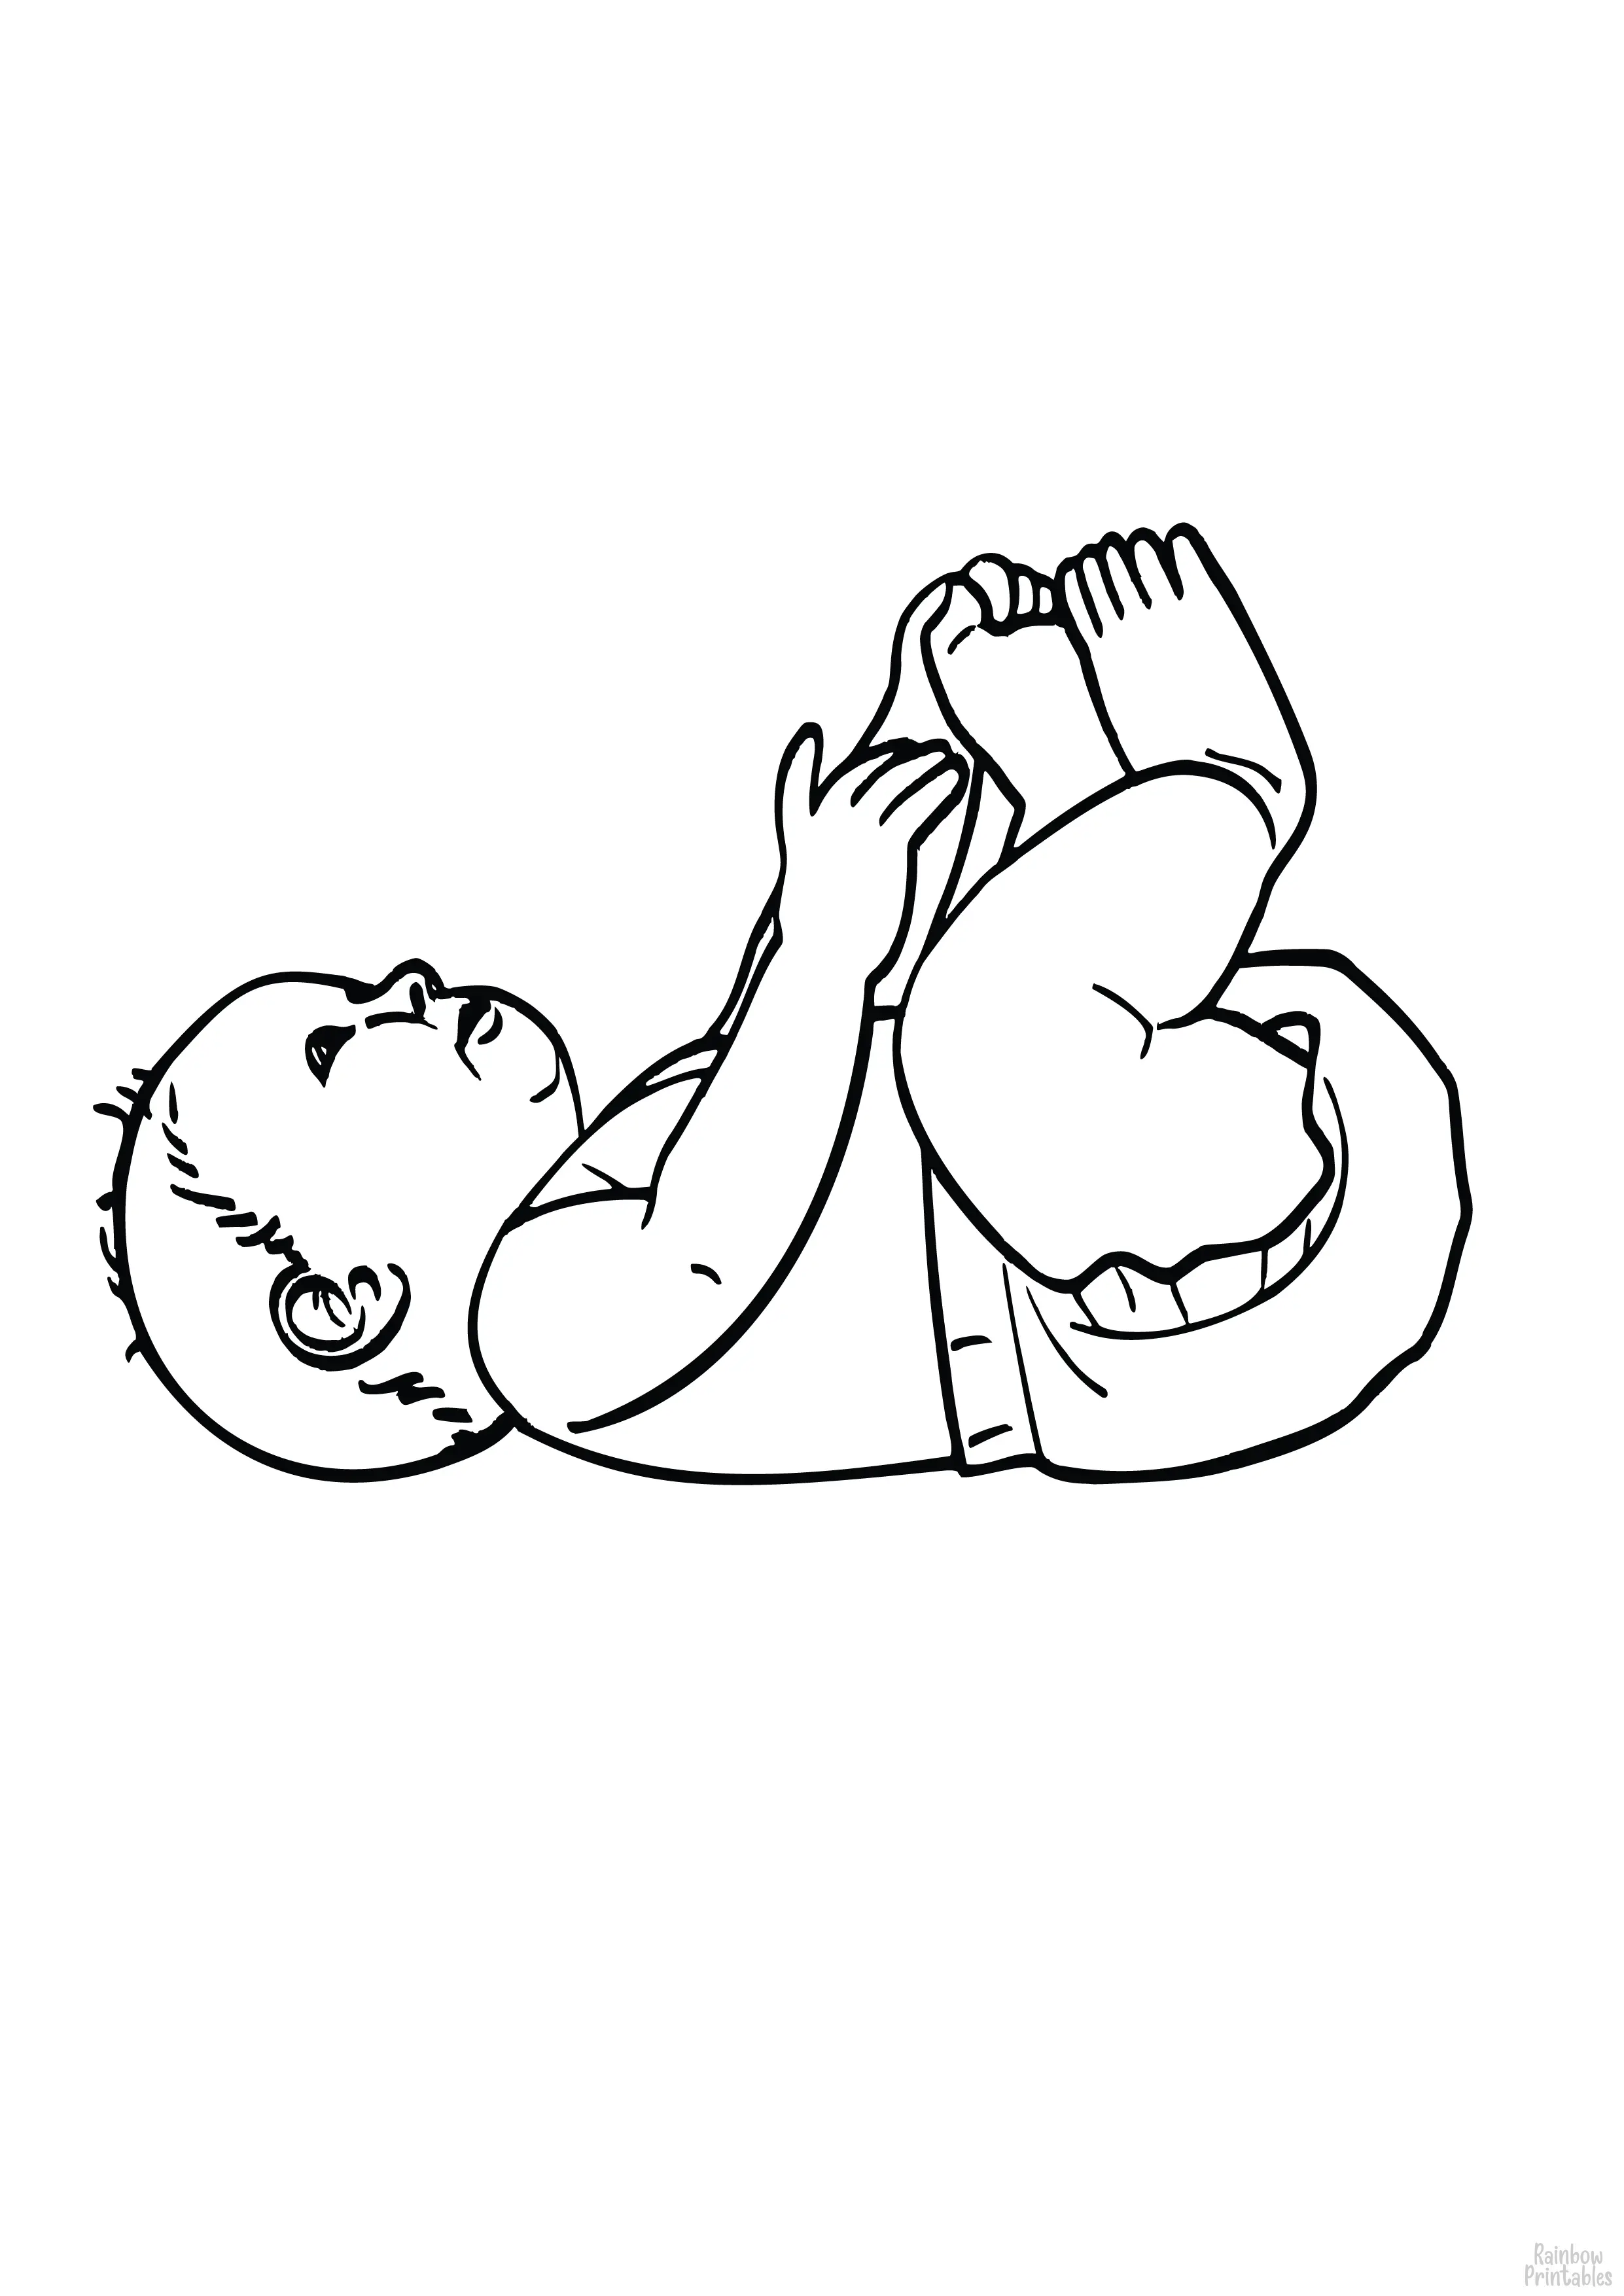 CUTE NEWBORN BABY Figure Free Clipart Coloring Pages for Kids Adults Art Activities Line Art